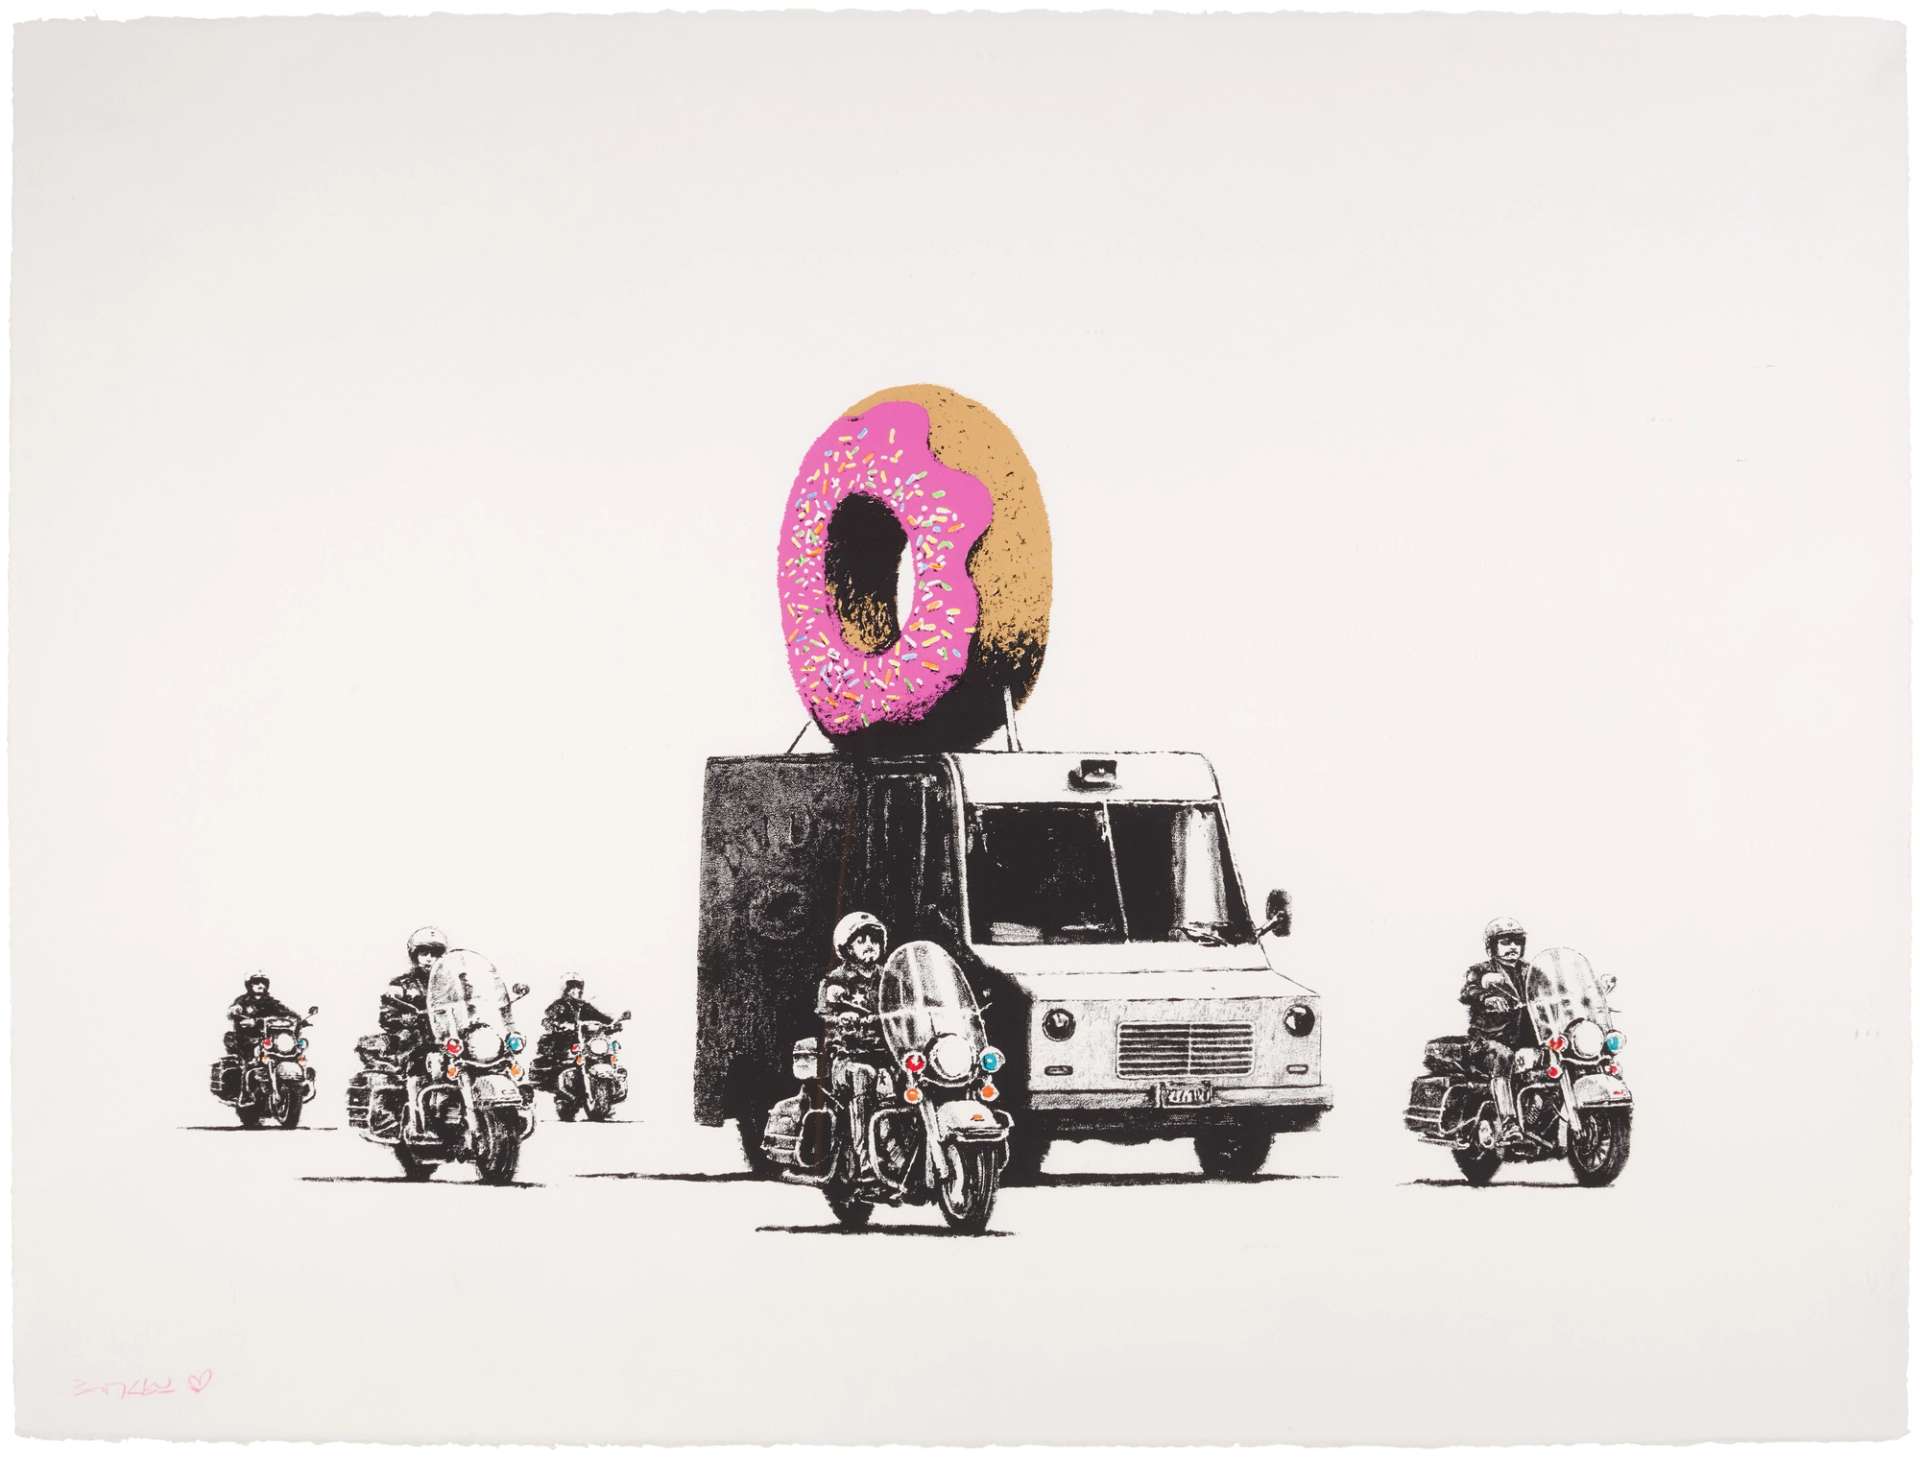 Banksy's Donuts, Strawberry. A strawberry donut on top of a truck being escorted by police on motorbikes.